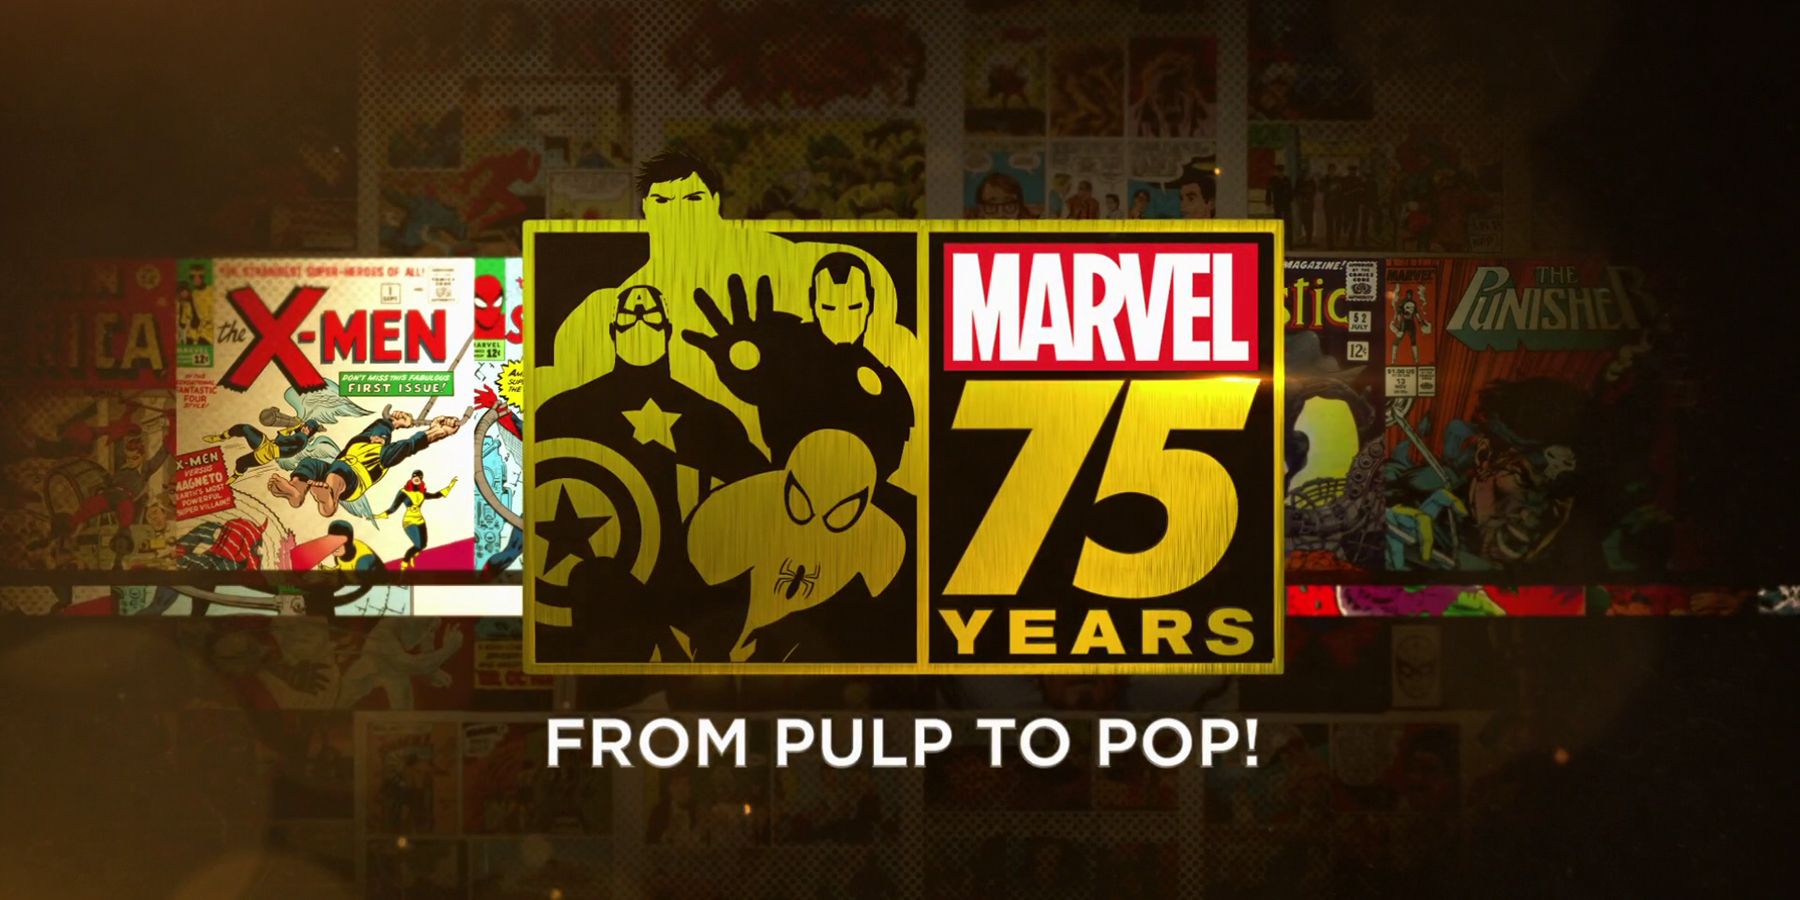 Marvel 75 years From pulp to pop